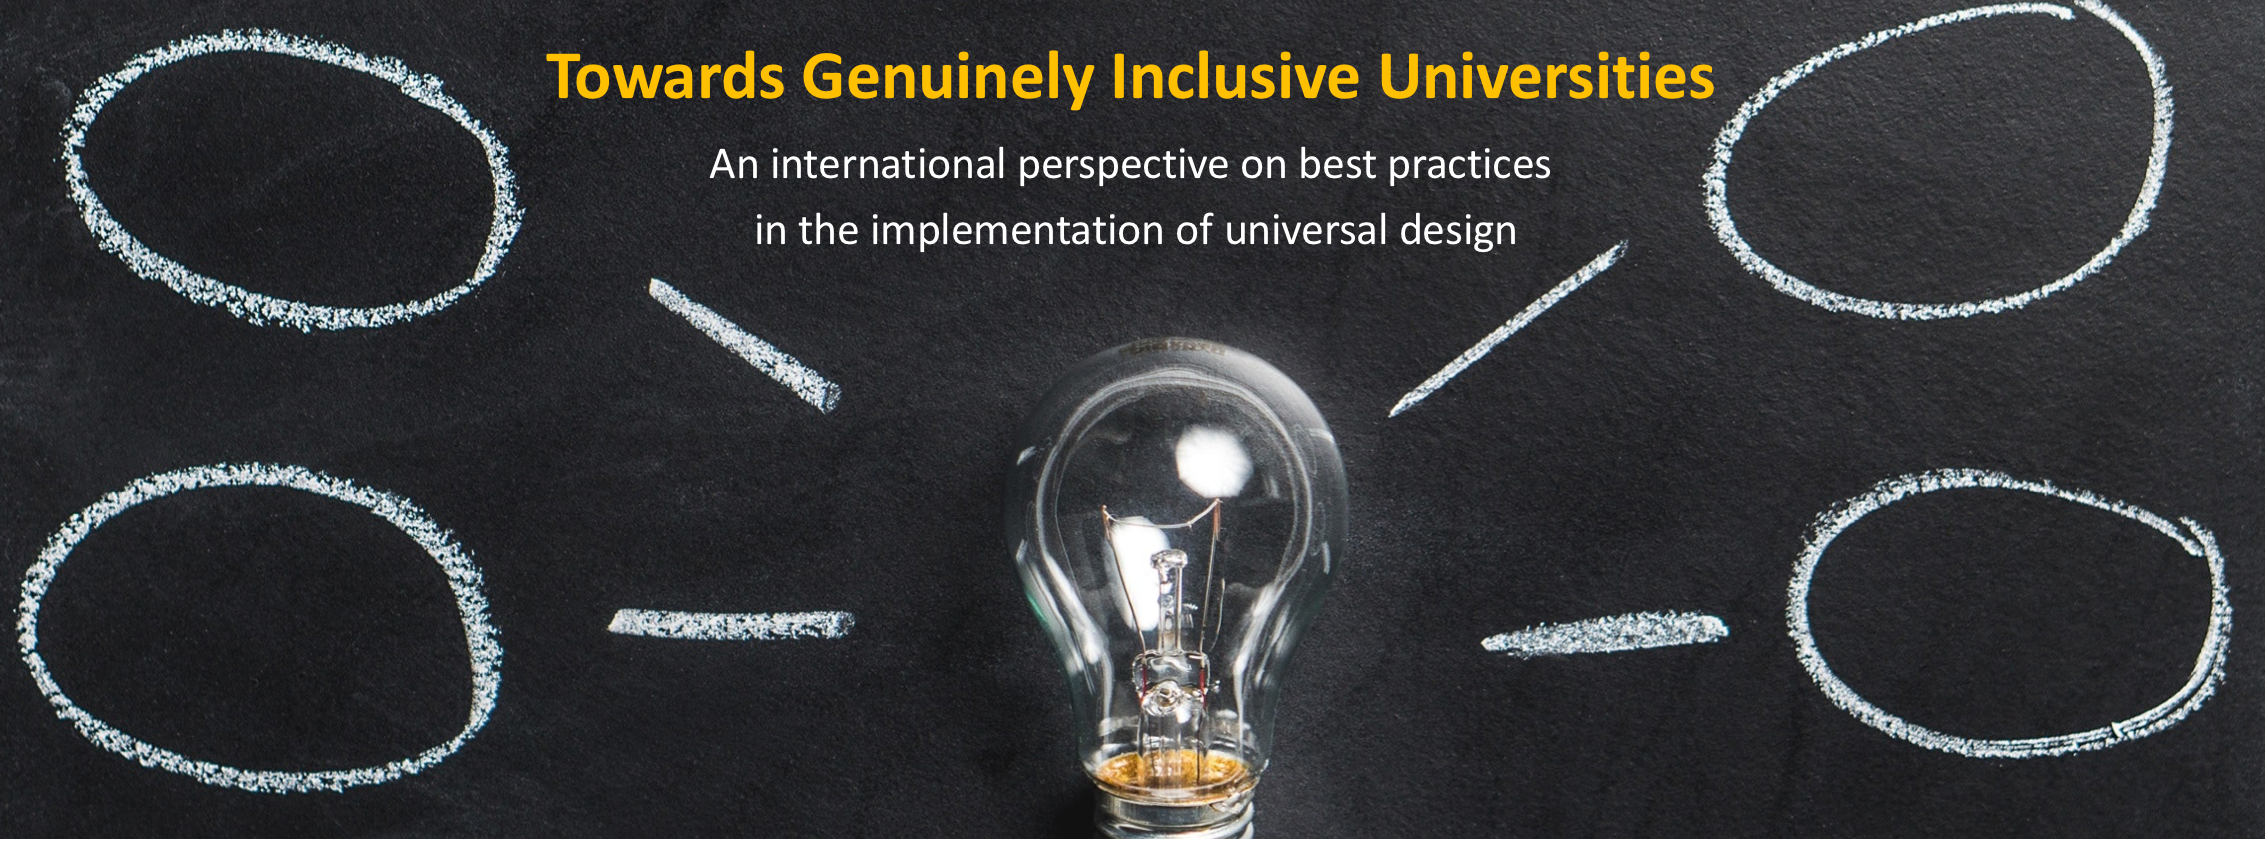  a lamp and innovative ideas with the title of the webinar ‘Towards Genuinely Inclusive Universities’ An international perspective on best practices in the implementation of universal design 